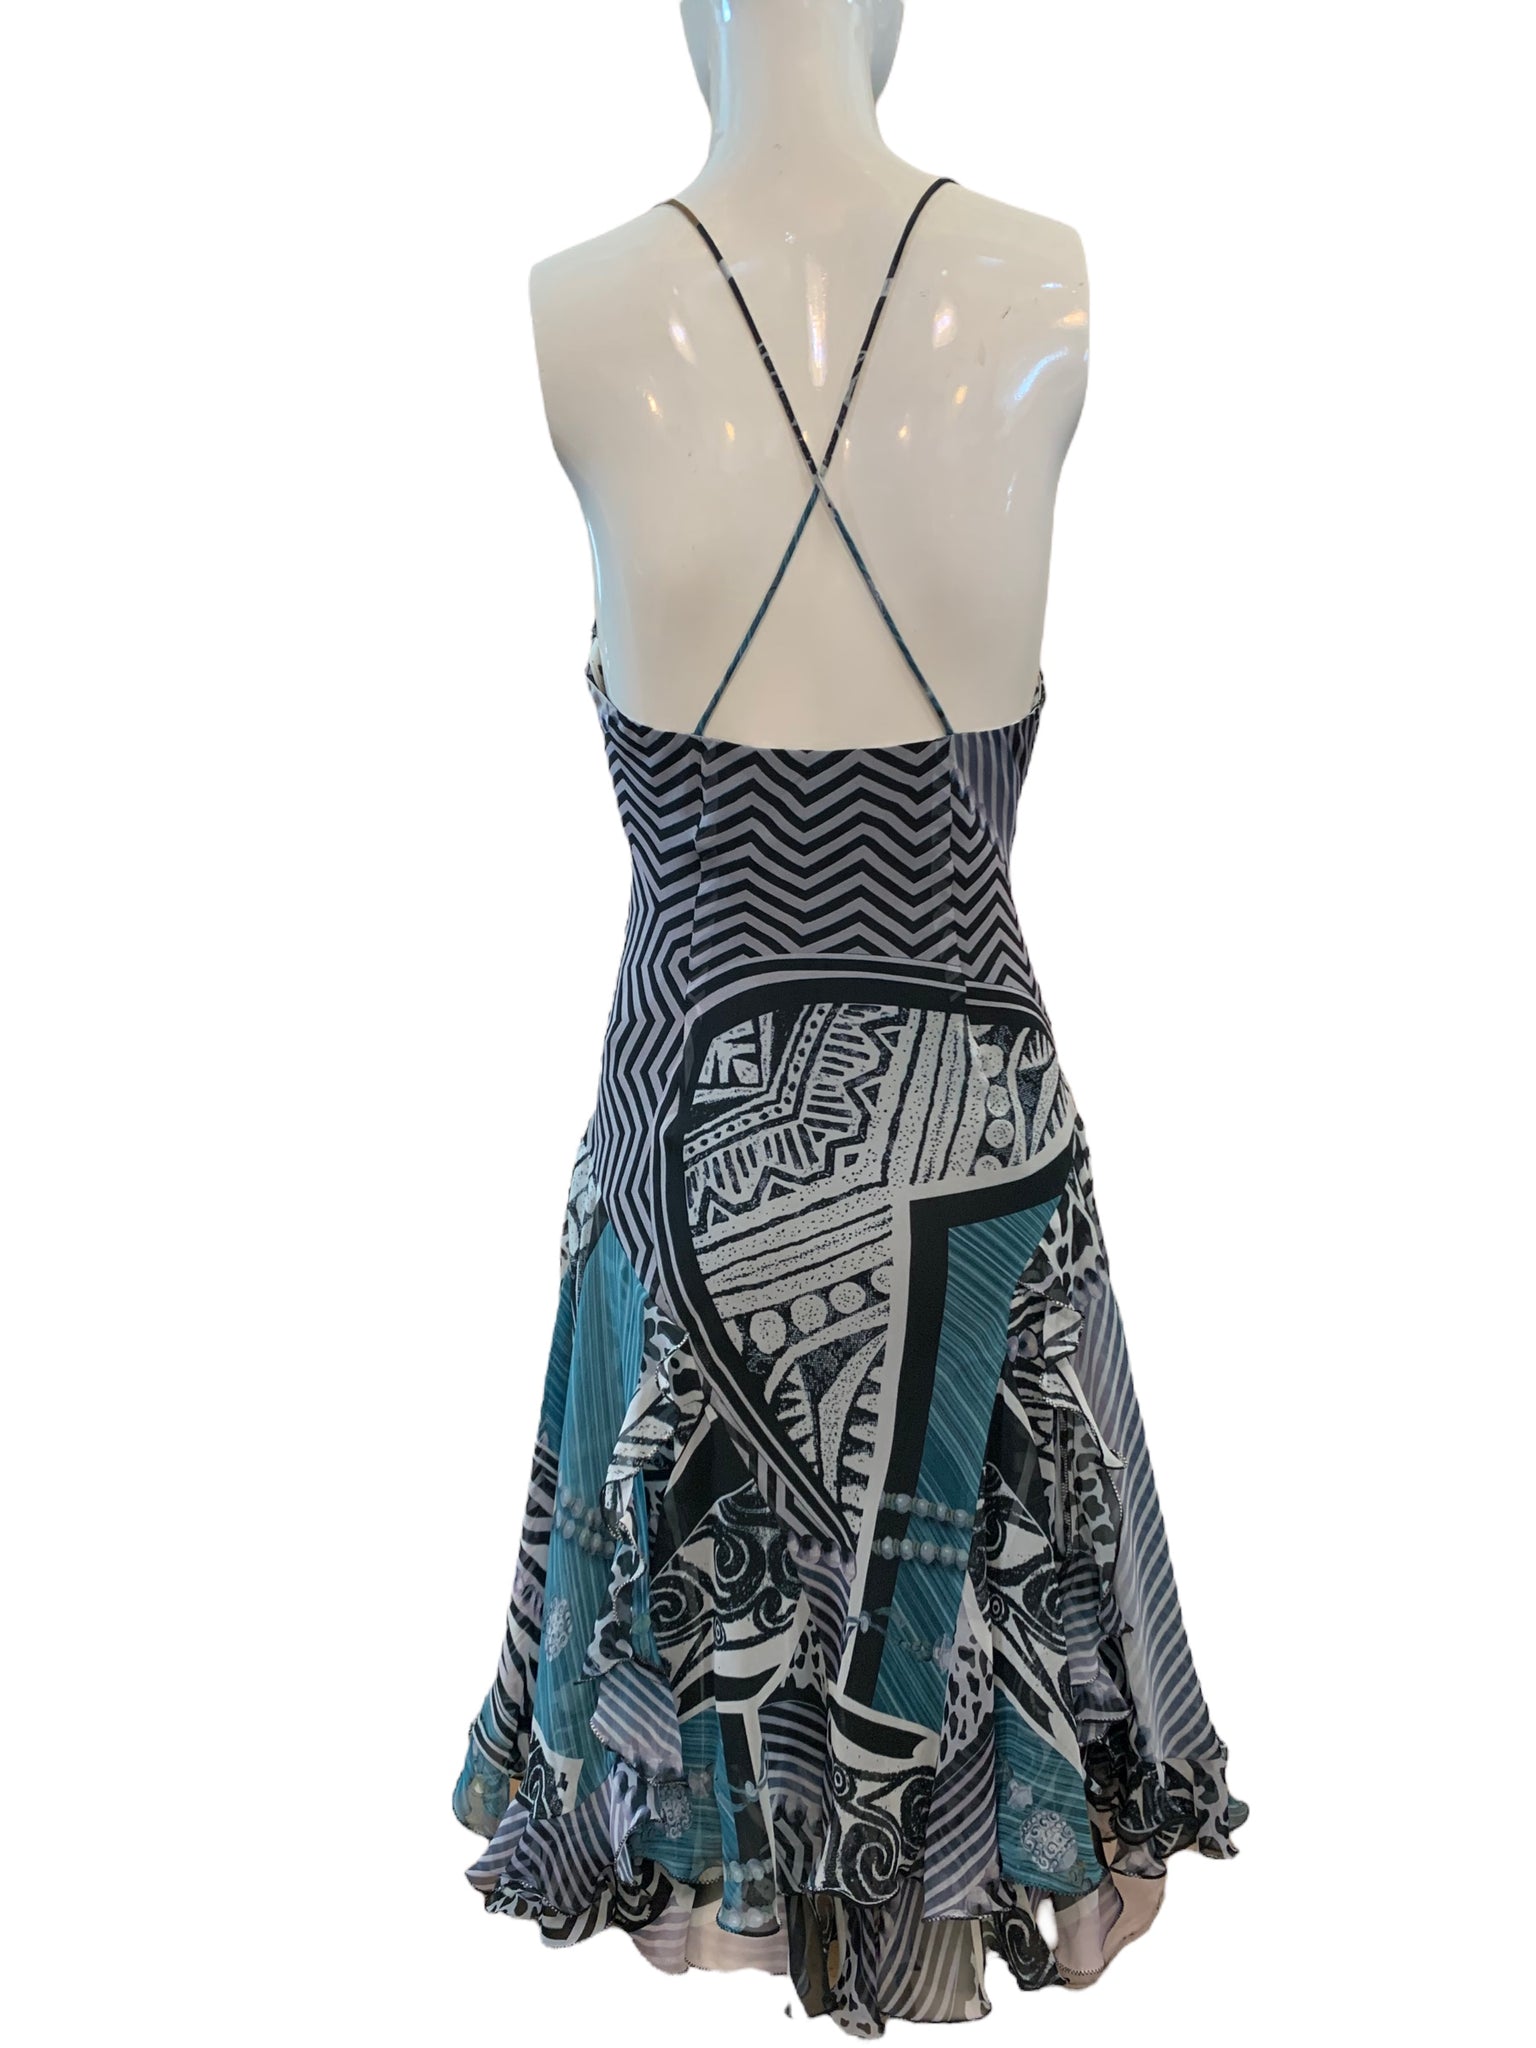 Diane Freis Print Chiffon Party Dress with Matching Stole. BACK 3 of 7